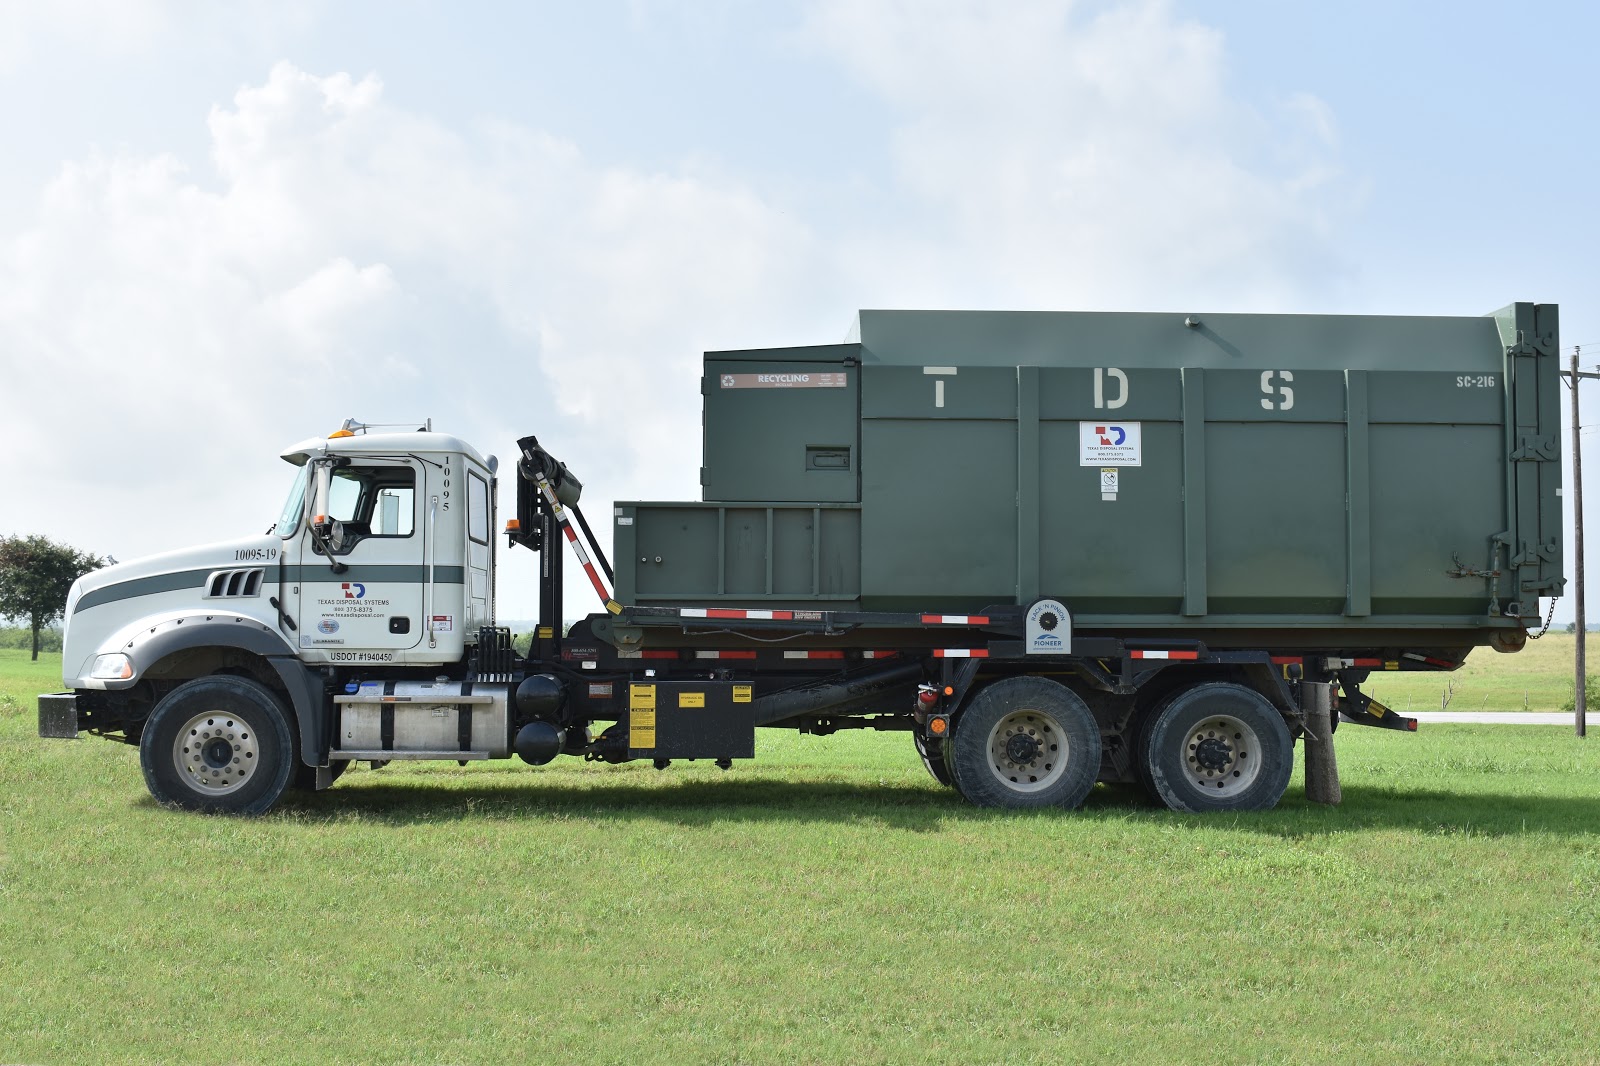 Texas Disposal Systems Compactor rental delivery